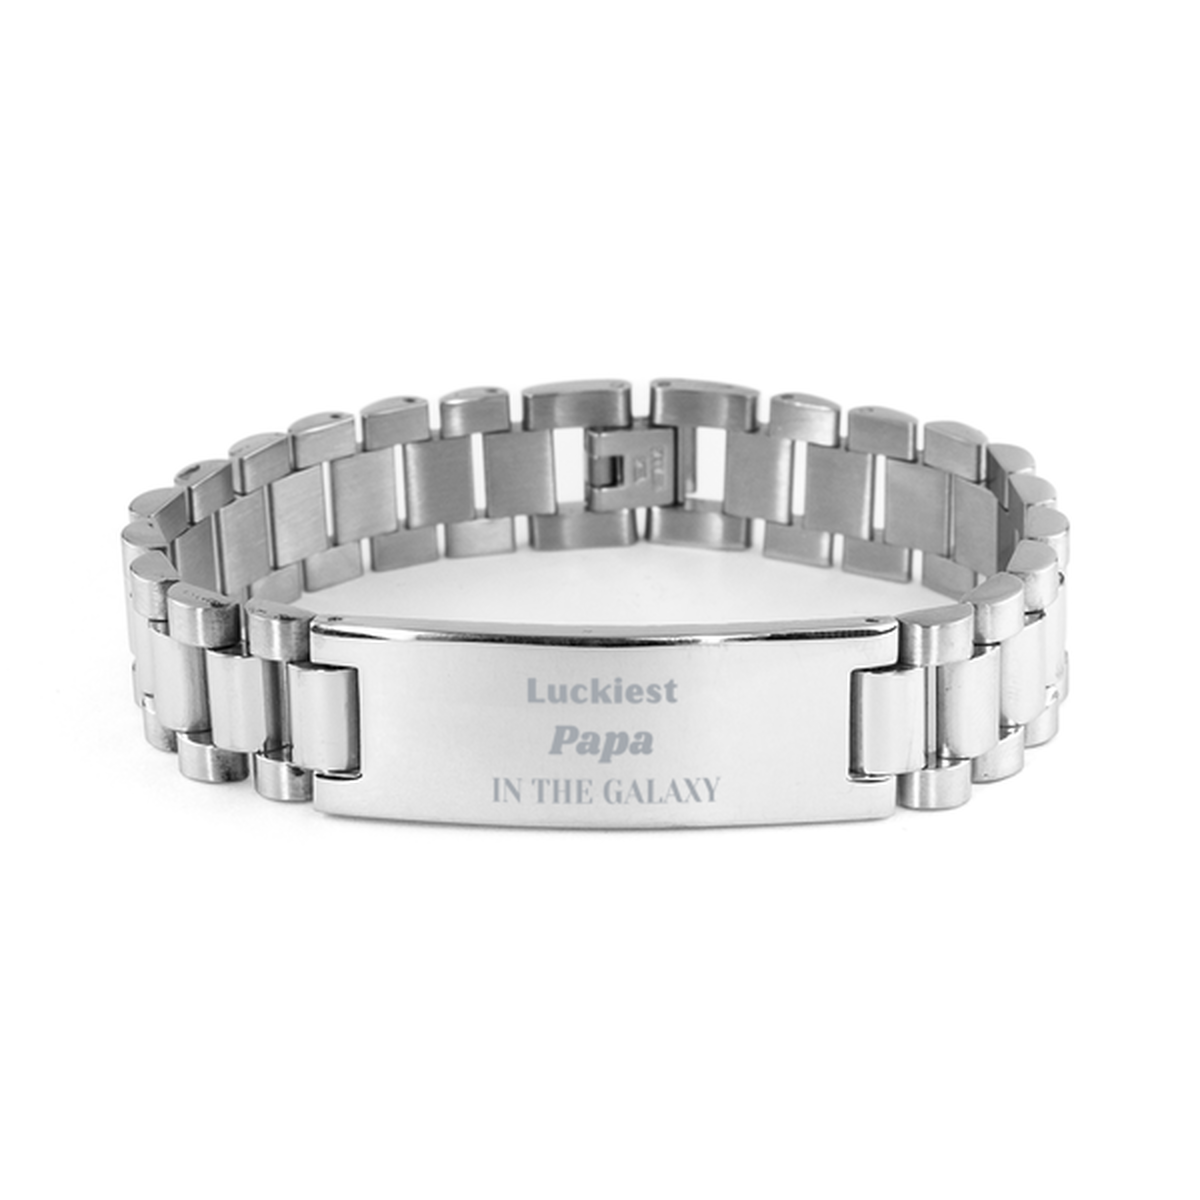 Luckiest Papa in the Galaxy, To My Papa Engraved Gifts, Christmas Papa Ladder Stainless Steel Bracelet Gifts, X-mas Birthday Unique Gifts For Papa Men Women